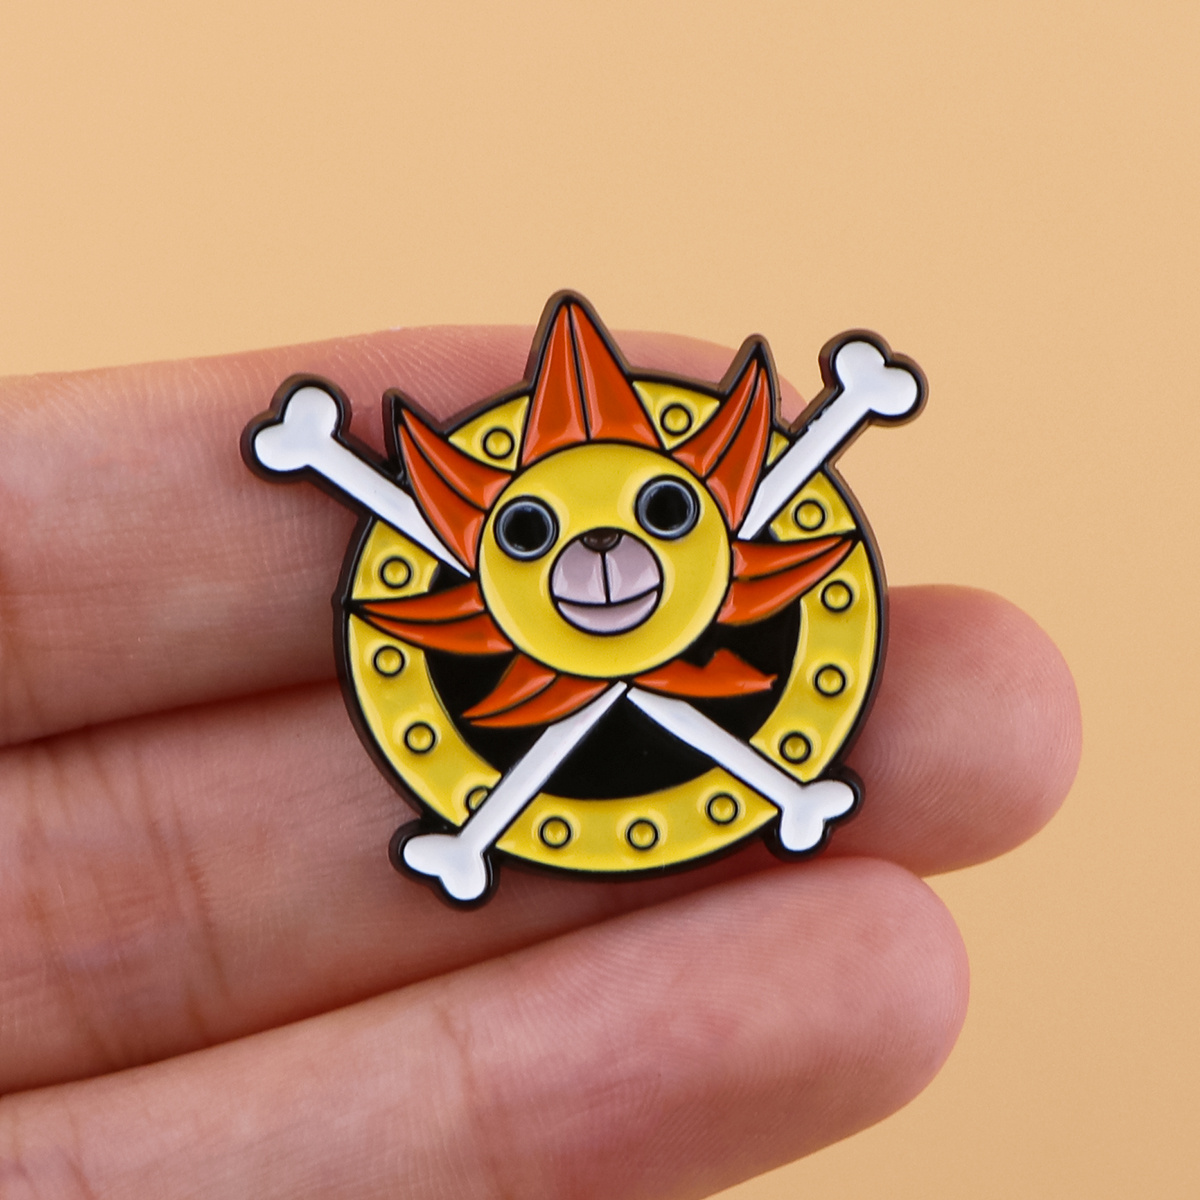 New Japanese Anime One Piece Film Red Cartoon Brooches Badge Luffy